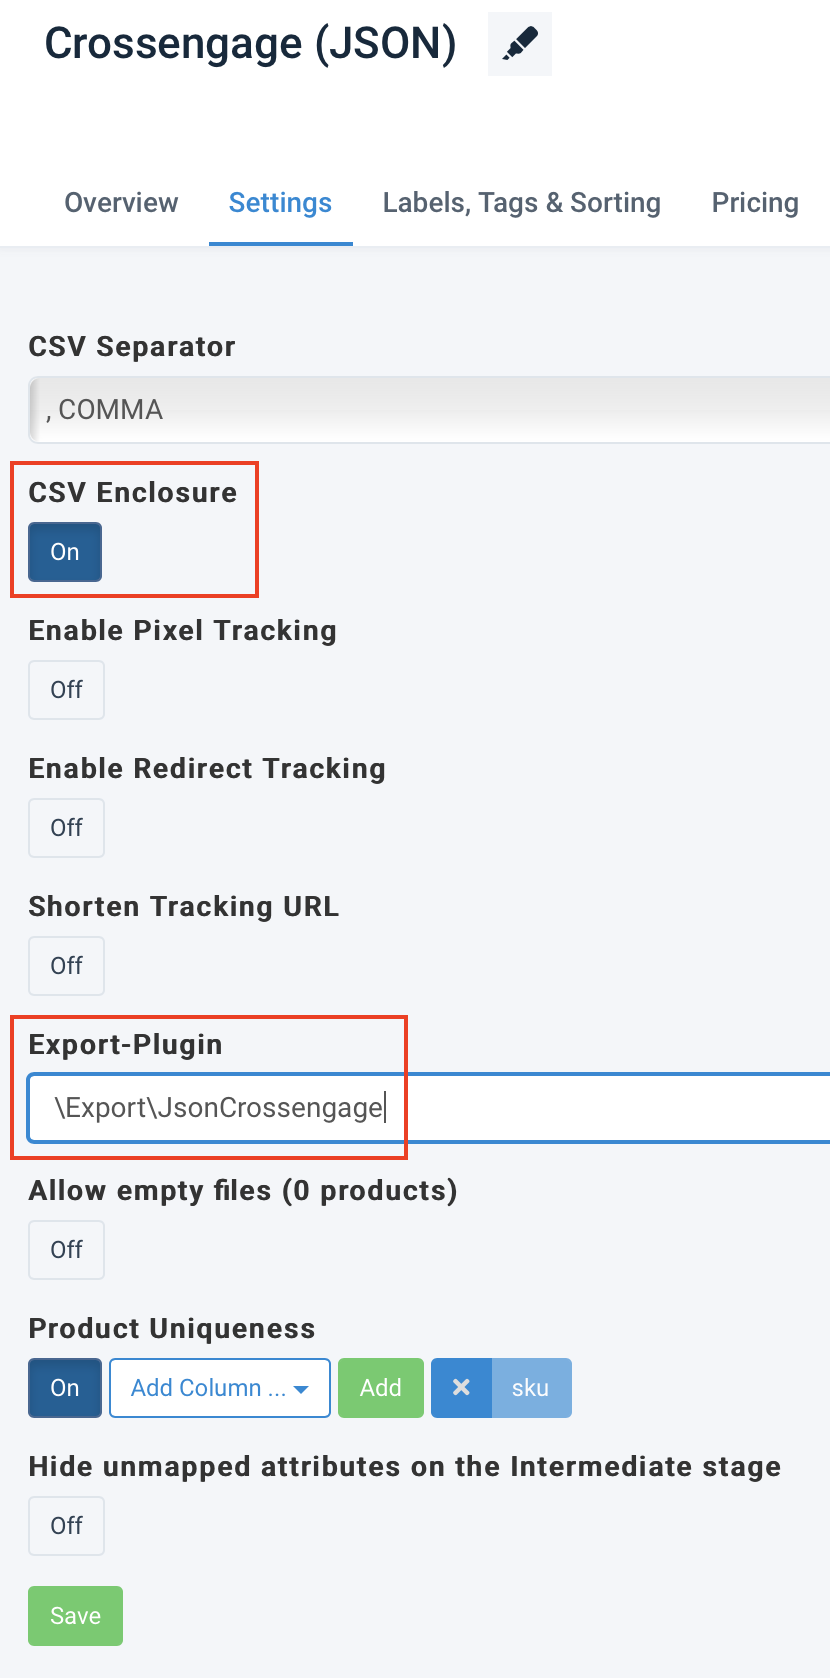 Add Export-Plugin values to activate the CrossEngage (JSON) export in Productsup